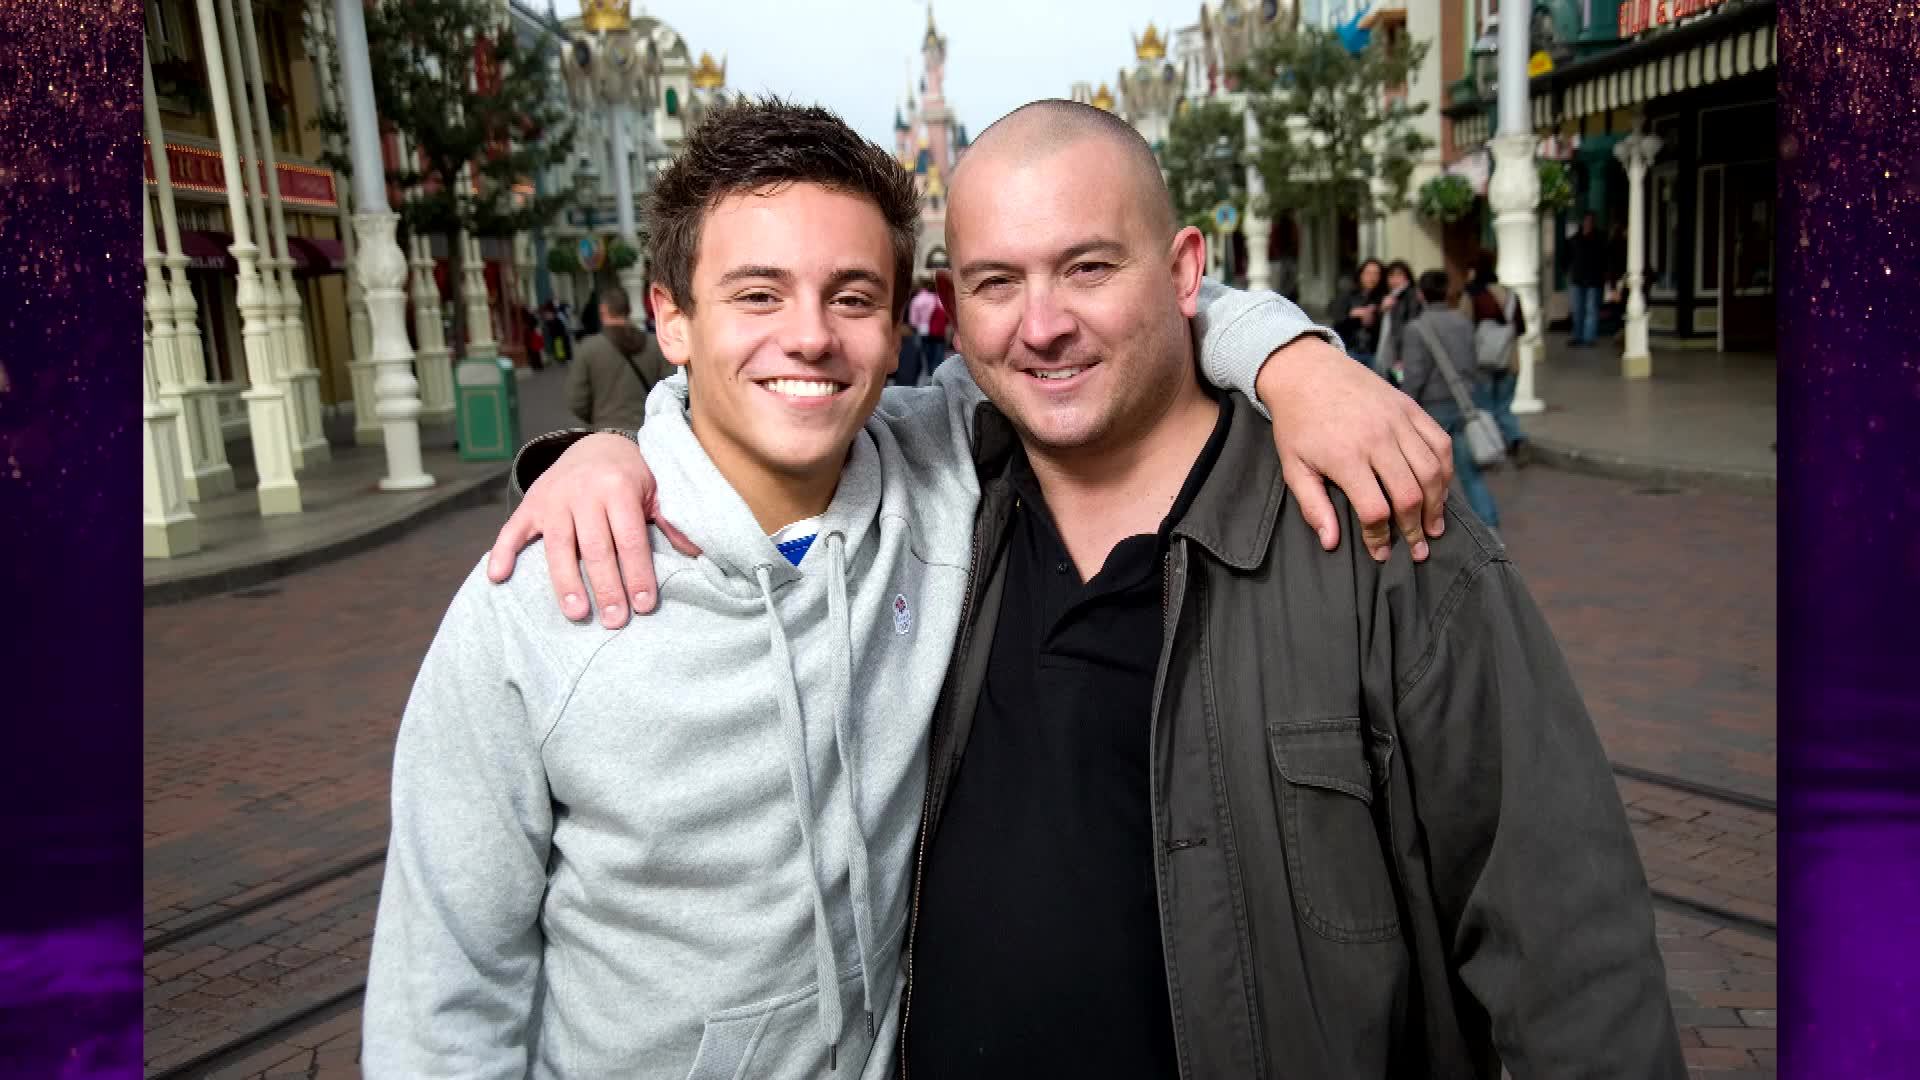 Watch Tom Daley’s Father Made His Dreams Come True | The Graham Norton Show Video Extras